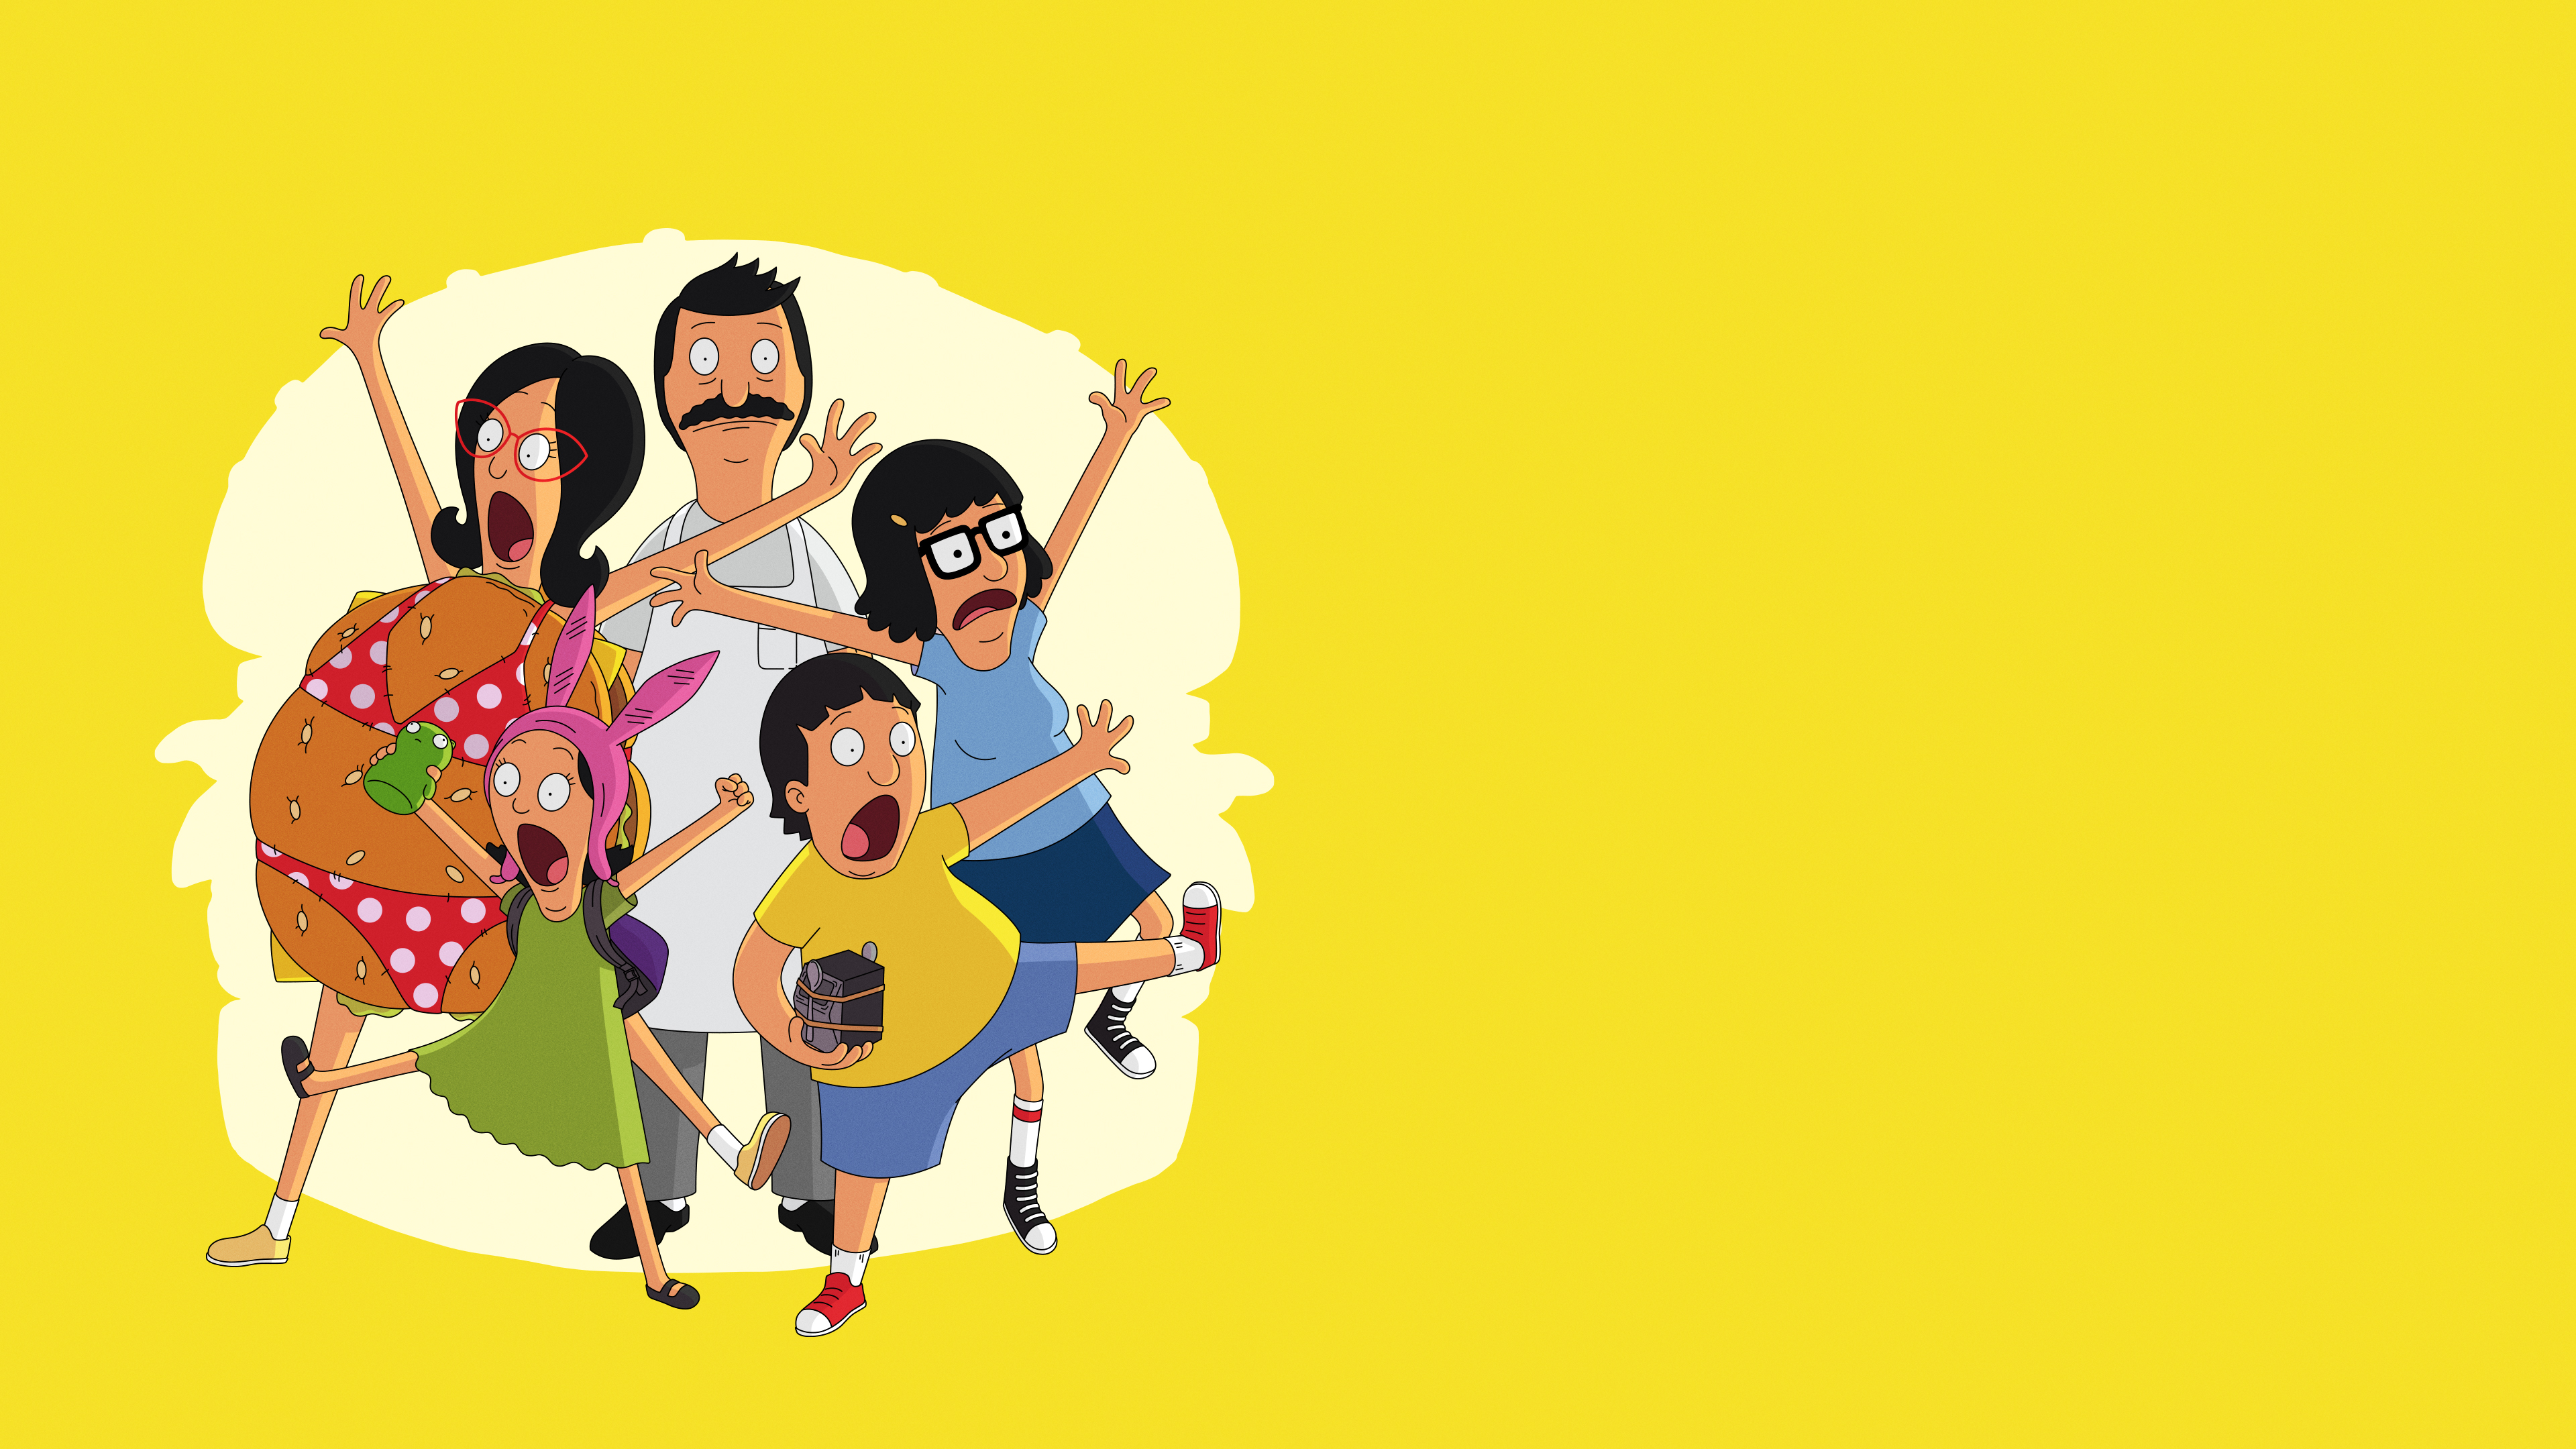 Bobs Burgers Vol 2 Wallpapers by Iconfactory on Dribbble